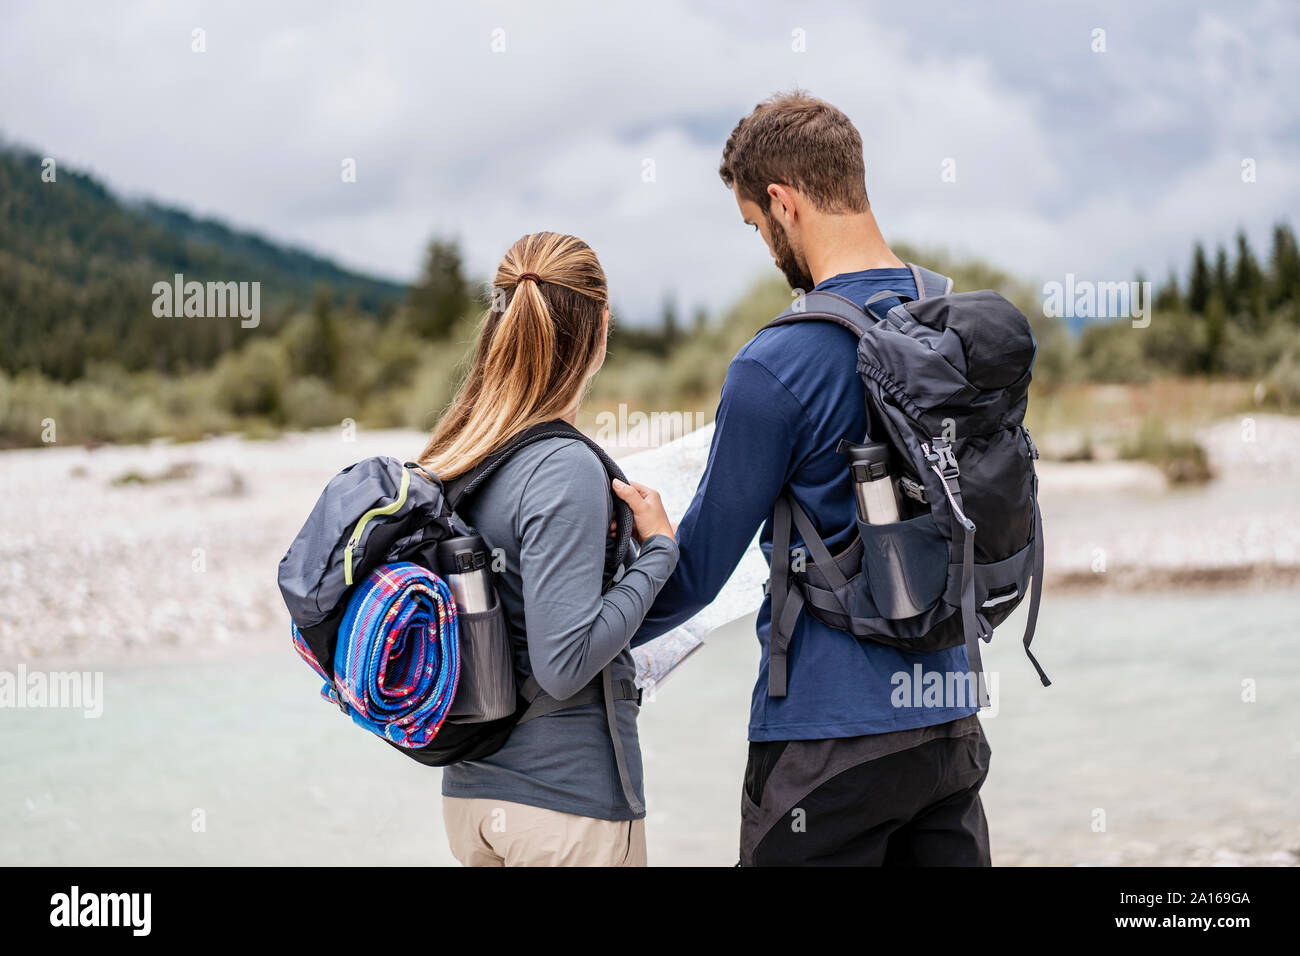 Young couple on a hiking trip reading map, Vorderriss, Bavaria, Germany Stock Photo